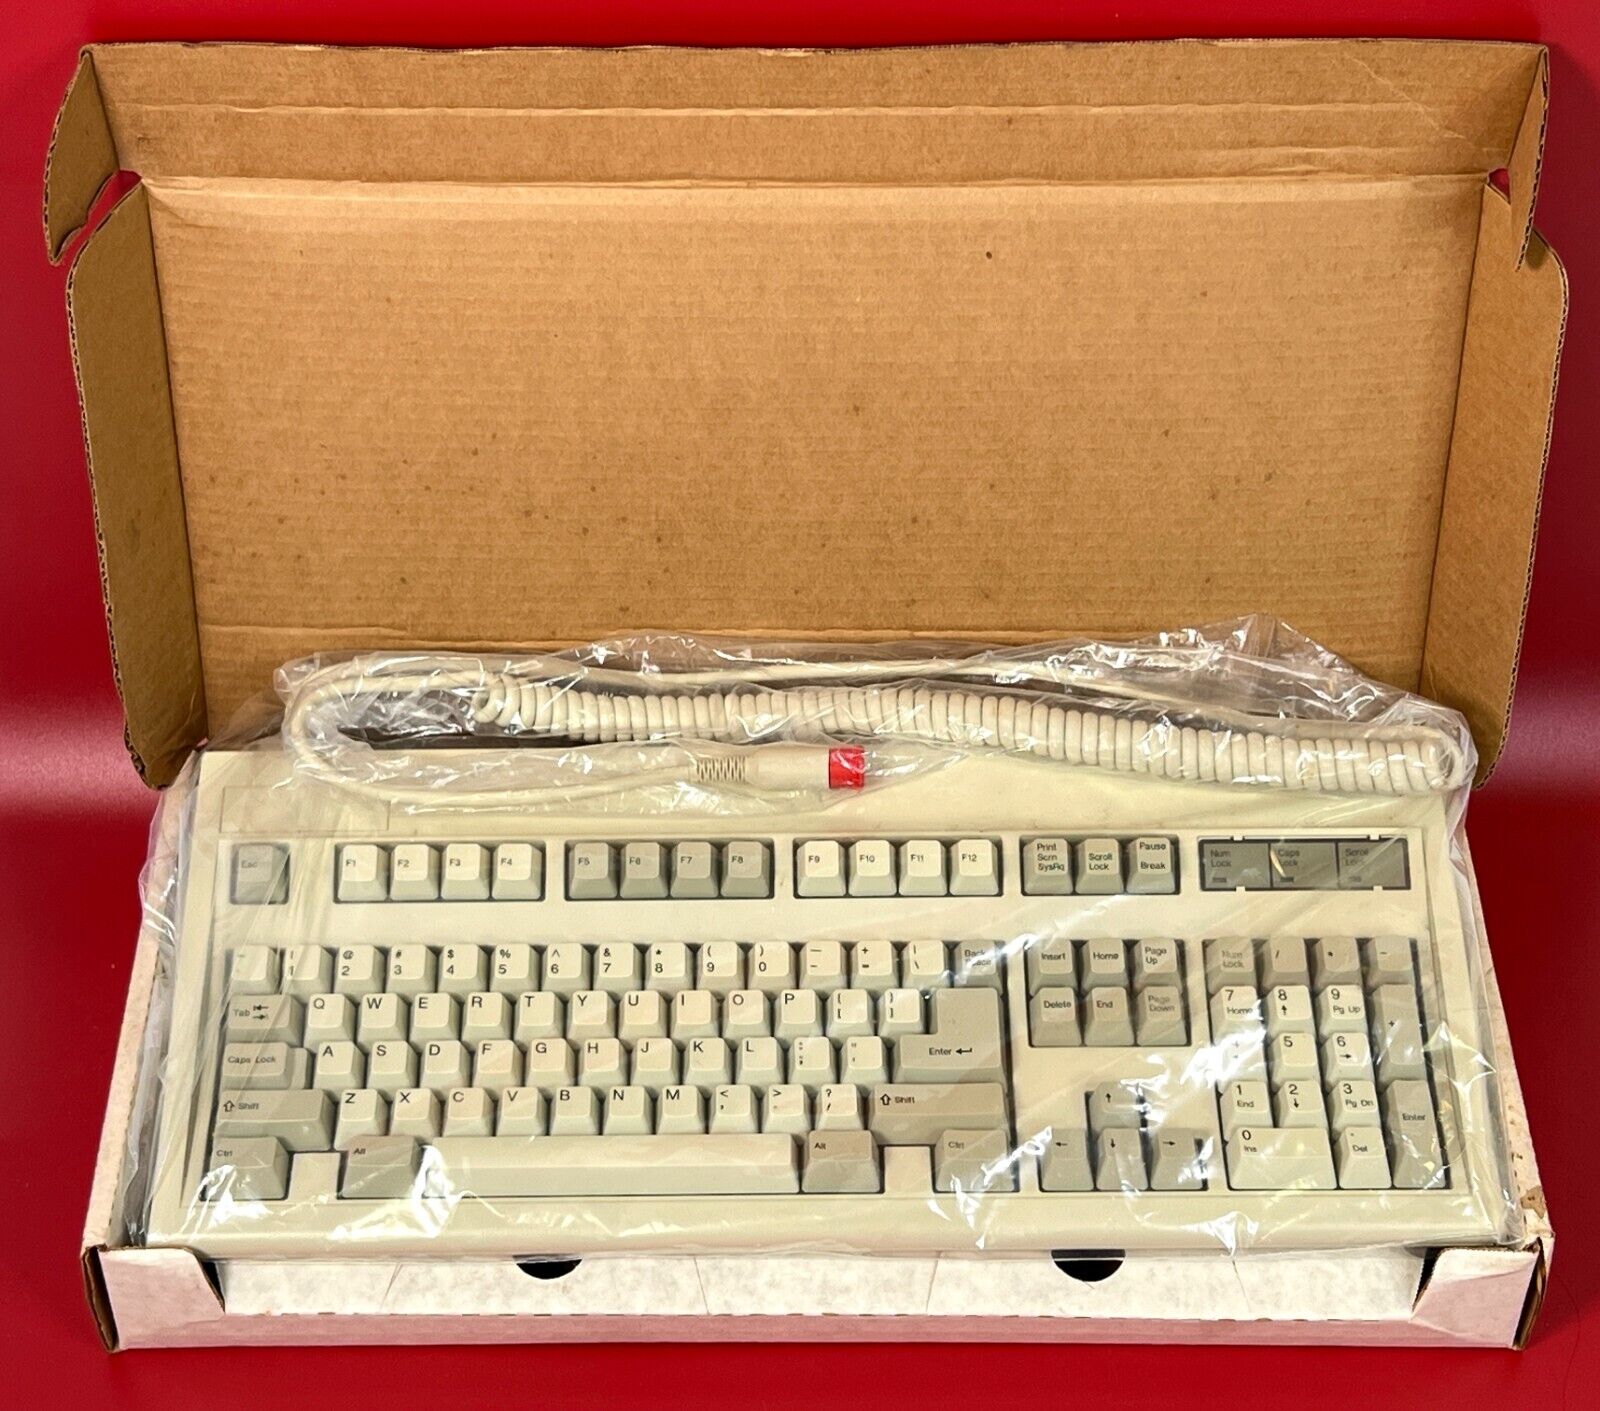 Vintage NOS Keytronic E03601Q AT/XT 5 Pin DIN Wired Computer Keyboard, SEALED